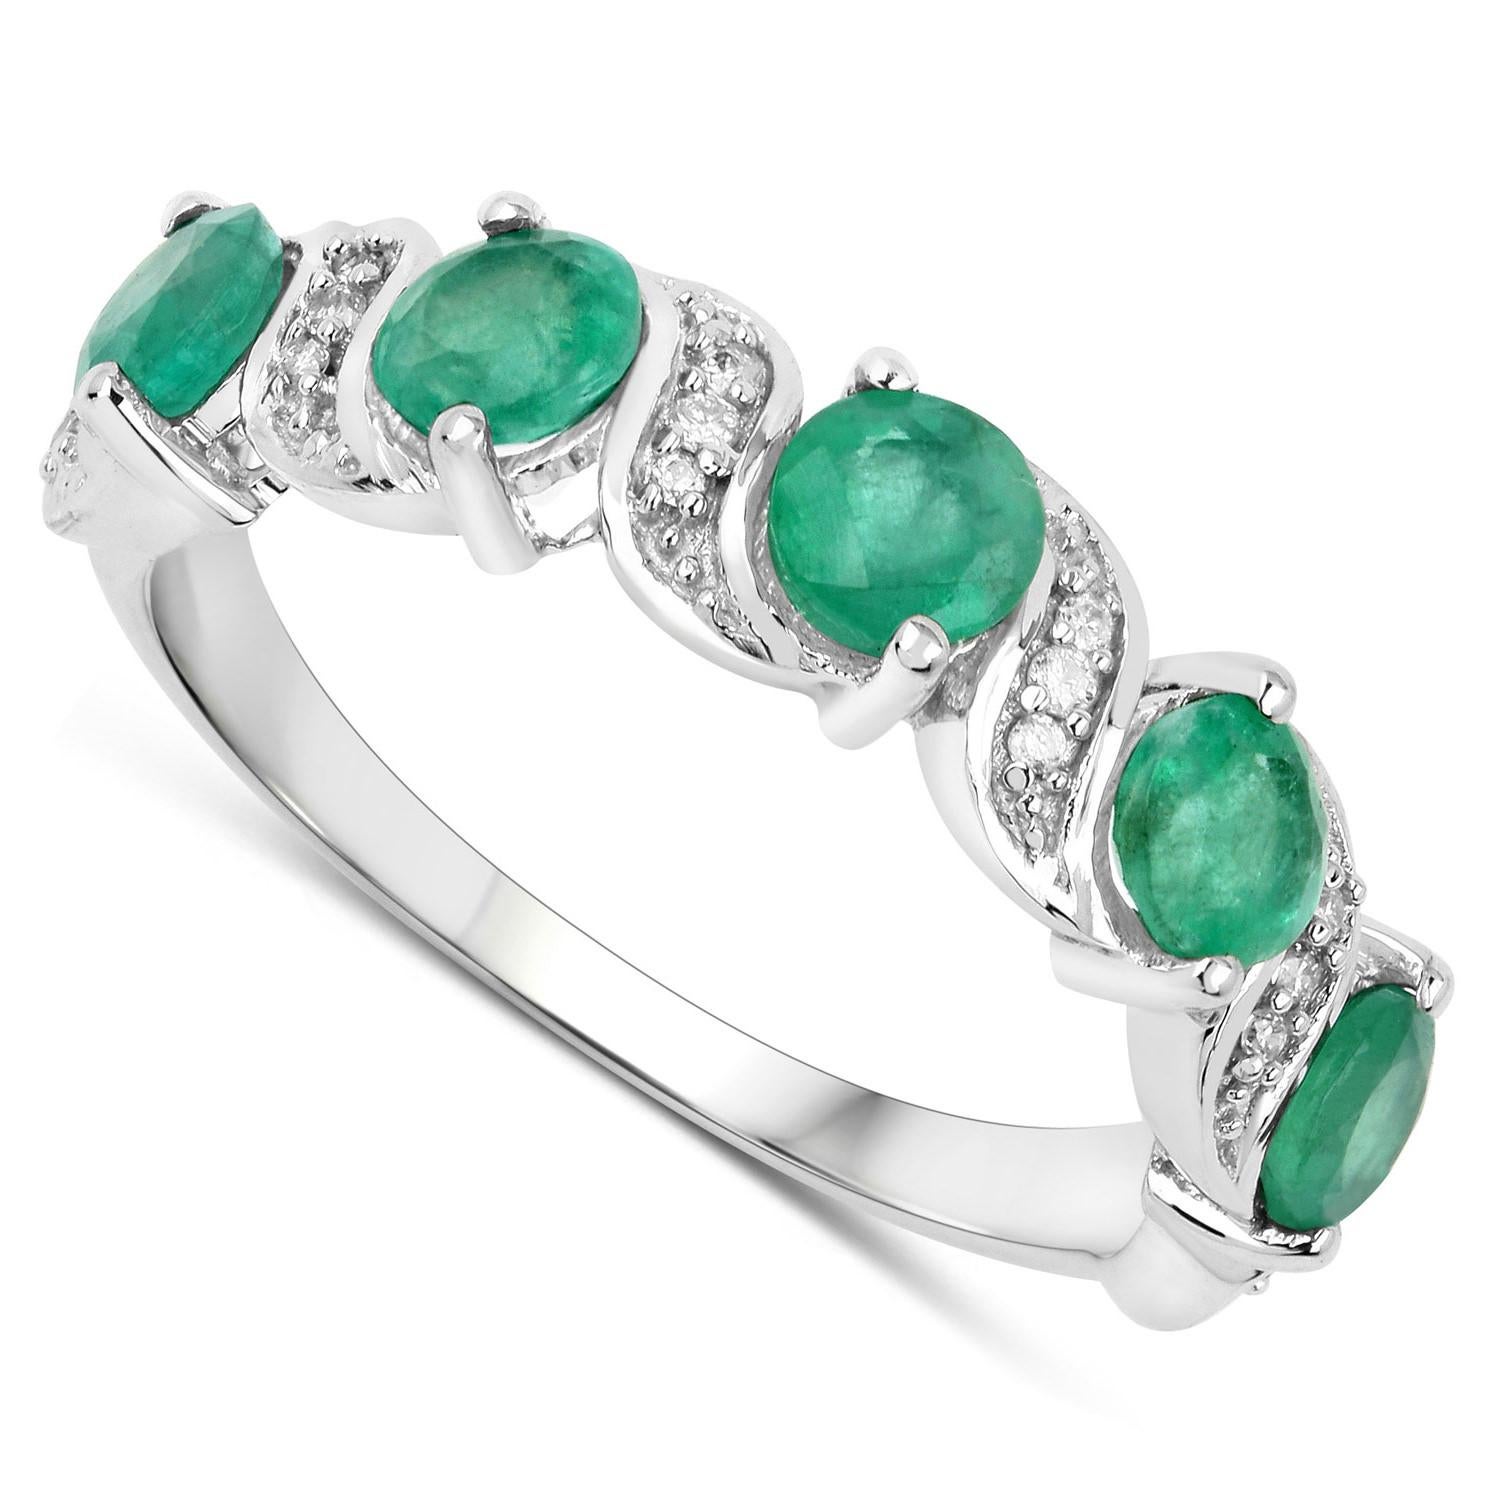 It comes with the appraisal by GIA GG/AJP
Zambian Emerald = 1.15 Carats
Cut: Round
Diamonds = 0.05 Carats
Diamonds Quantity: 18
Metal: 14K White Gold
Ring Size: 7* US
*It can be resized complimentary